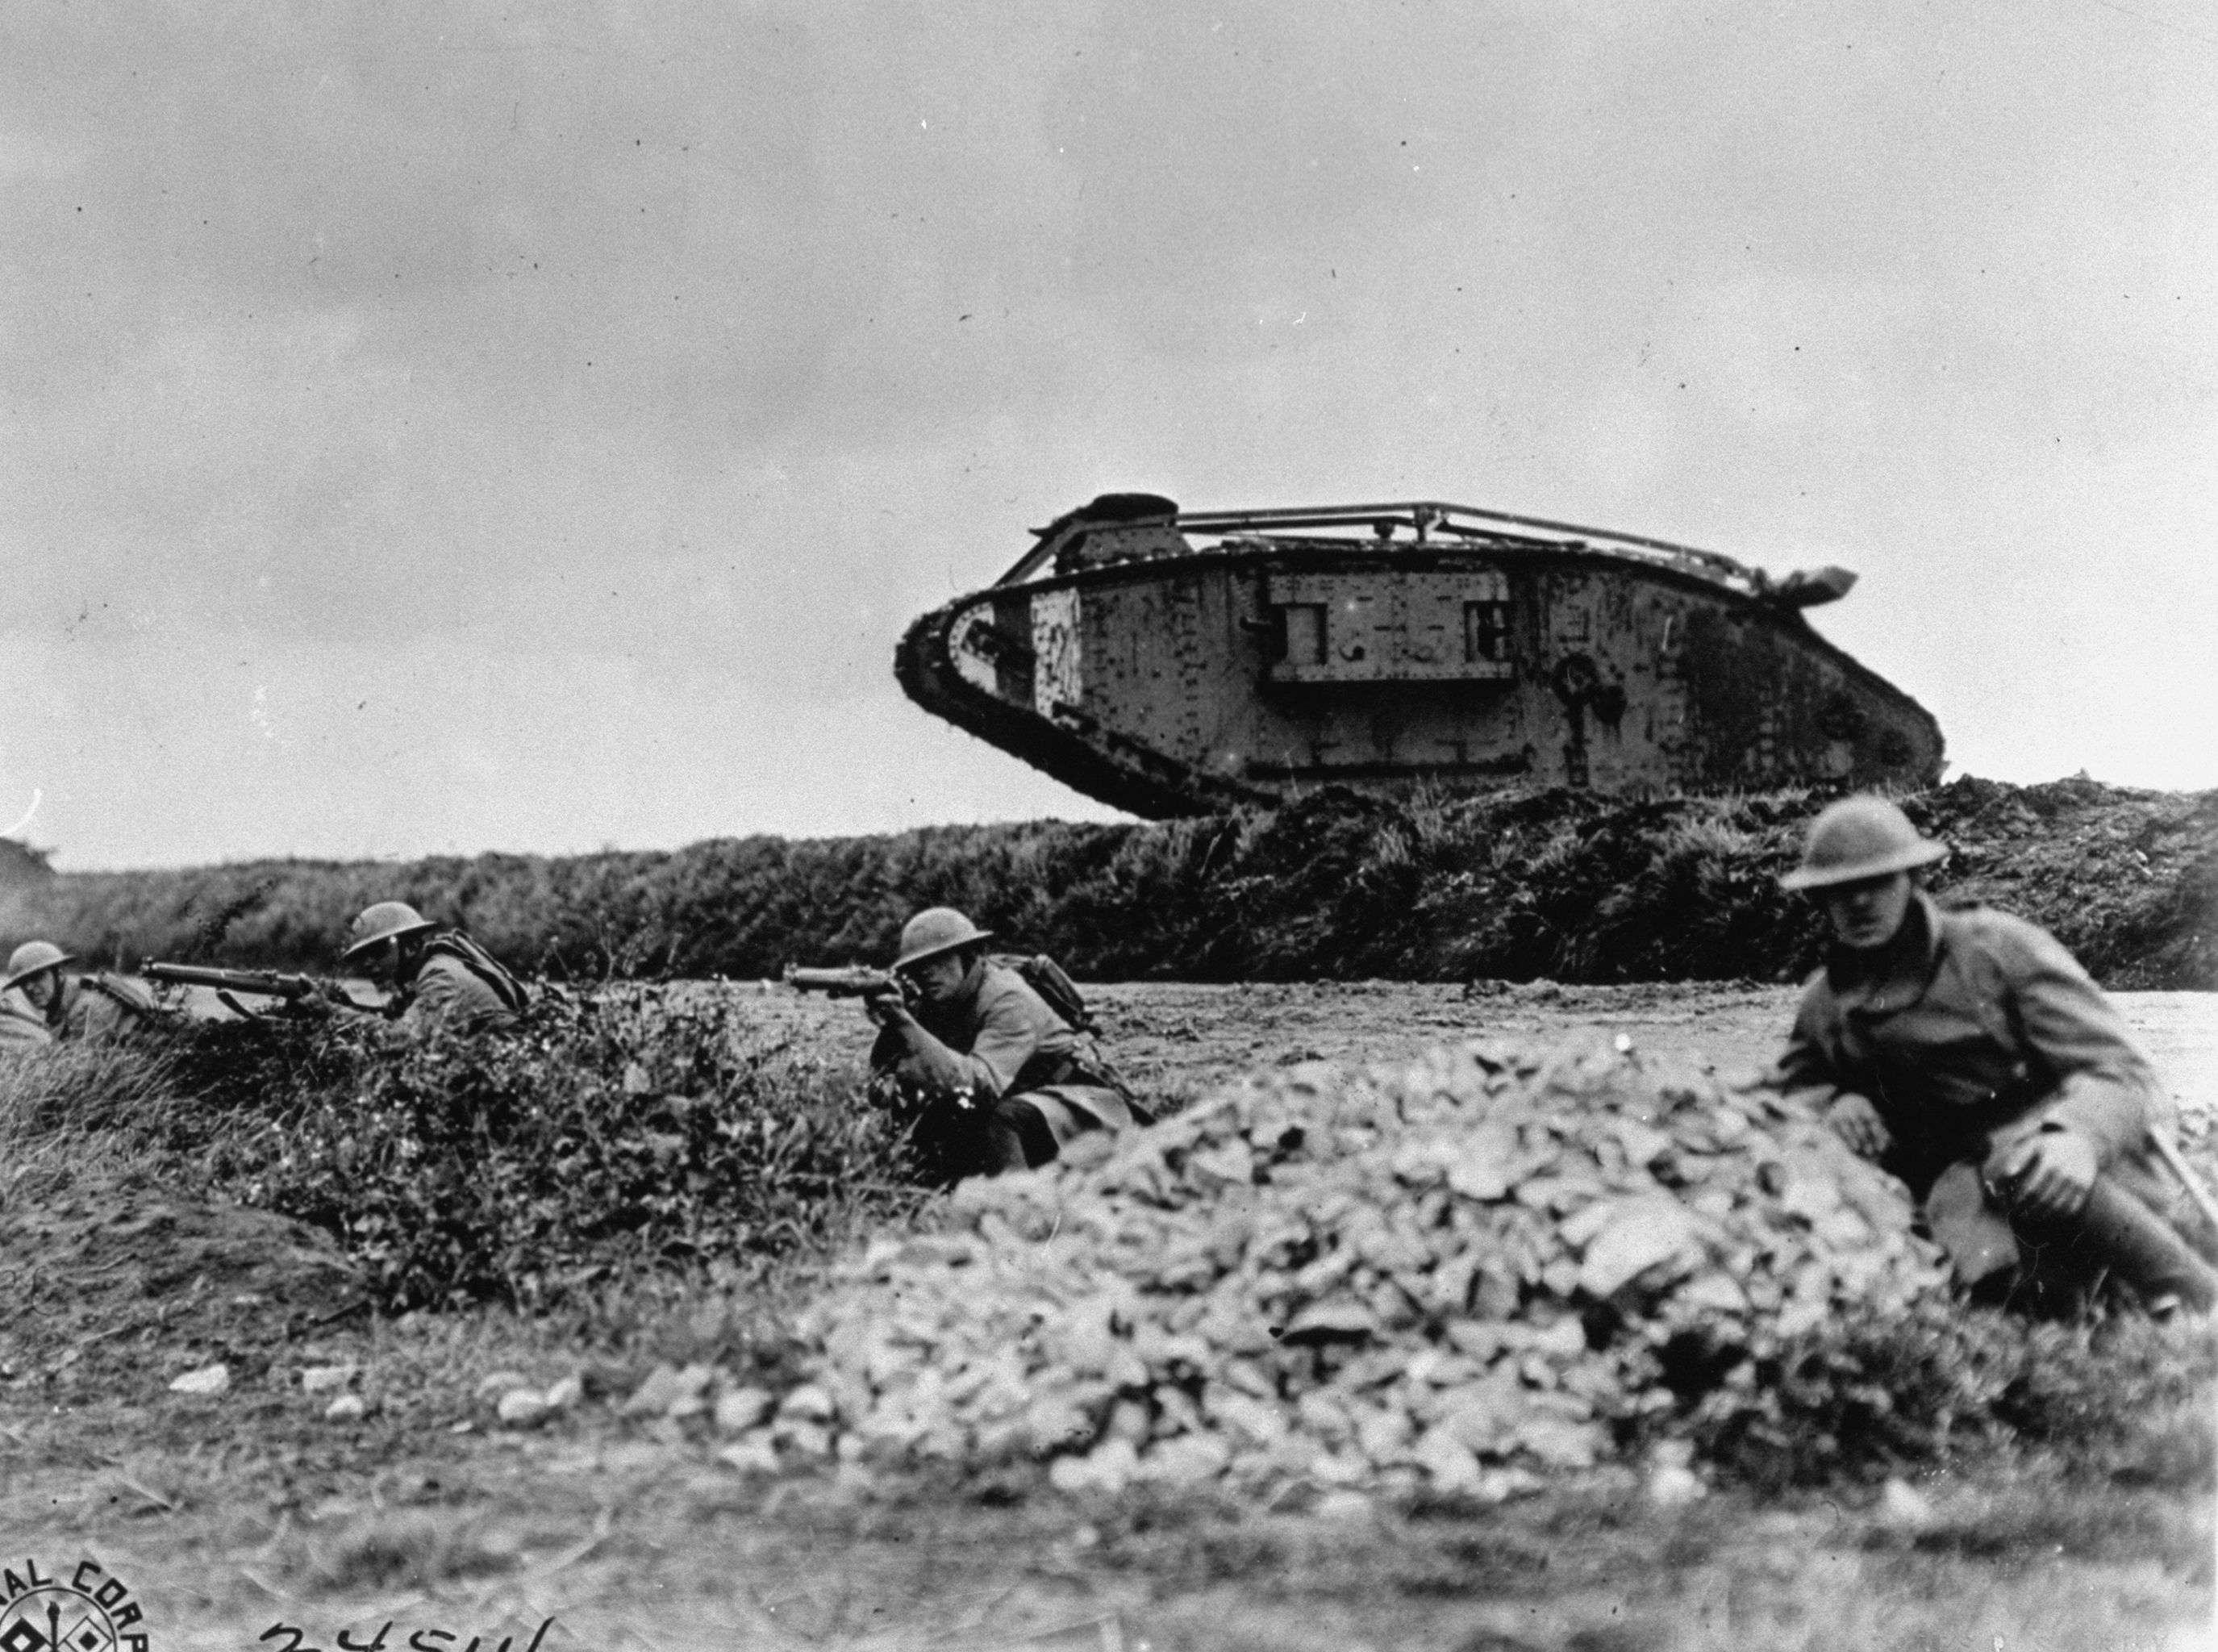 in which battle were tanks first used